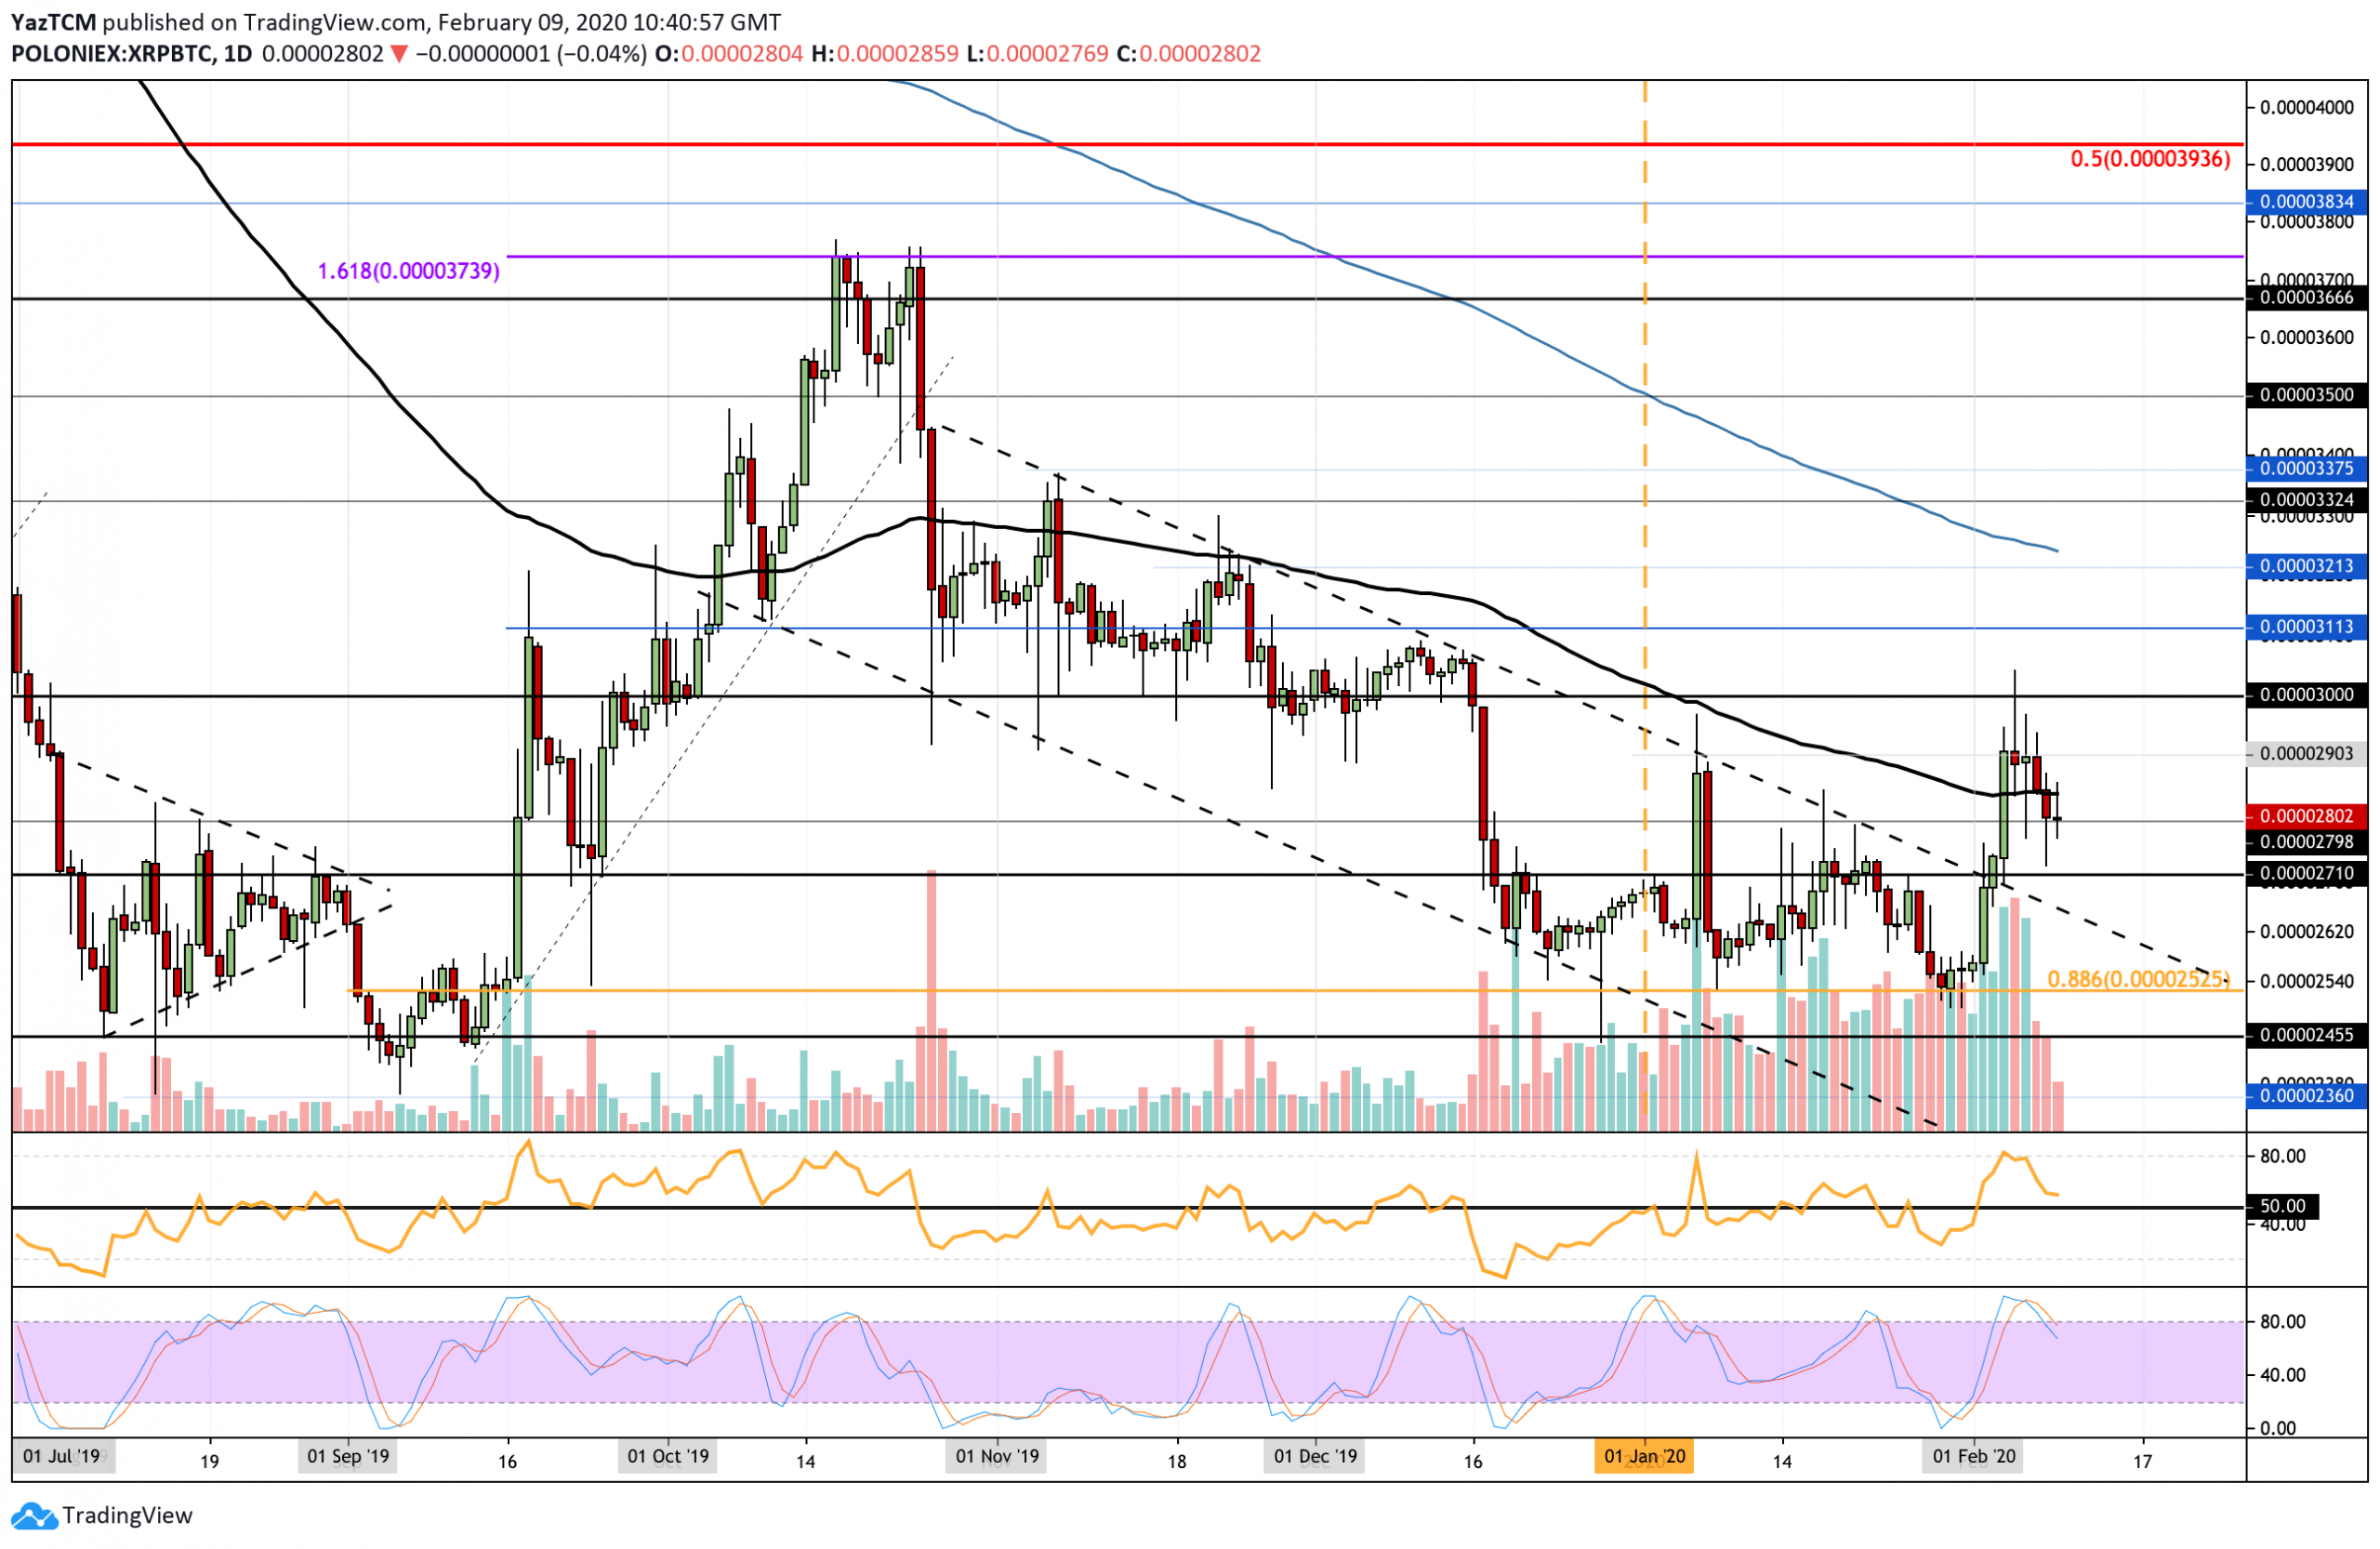 Ripple Price Analysis: XRP Stable Above $0.28 Following Bitcoin’s Latest Gains